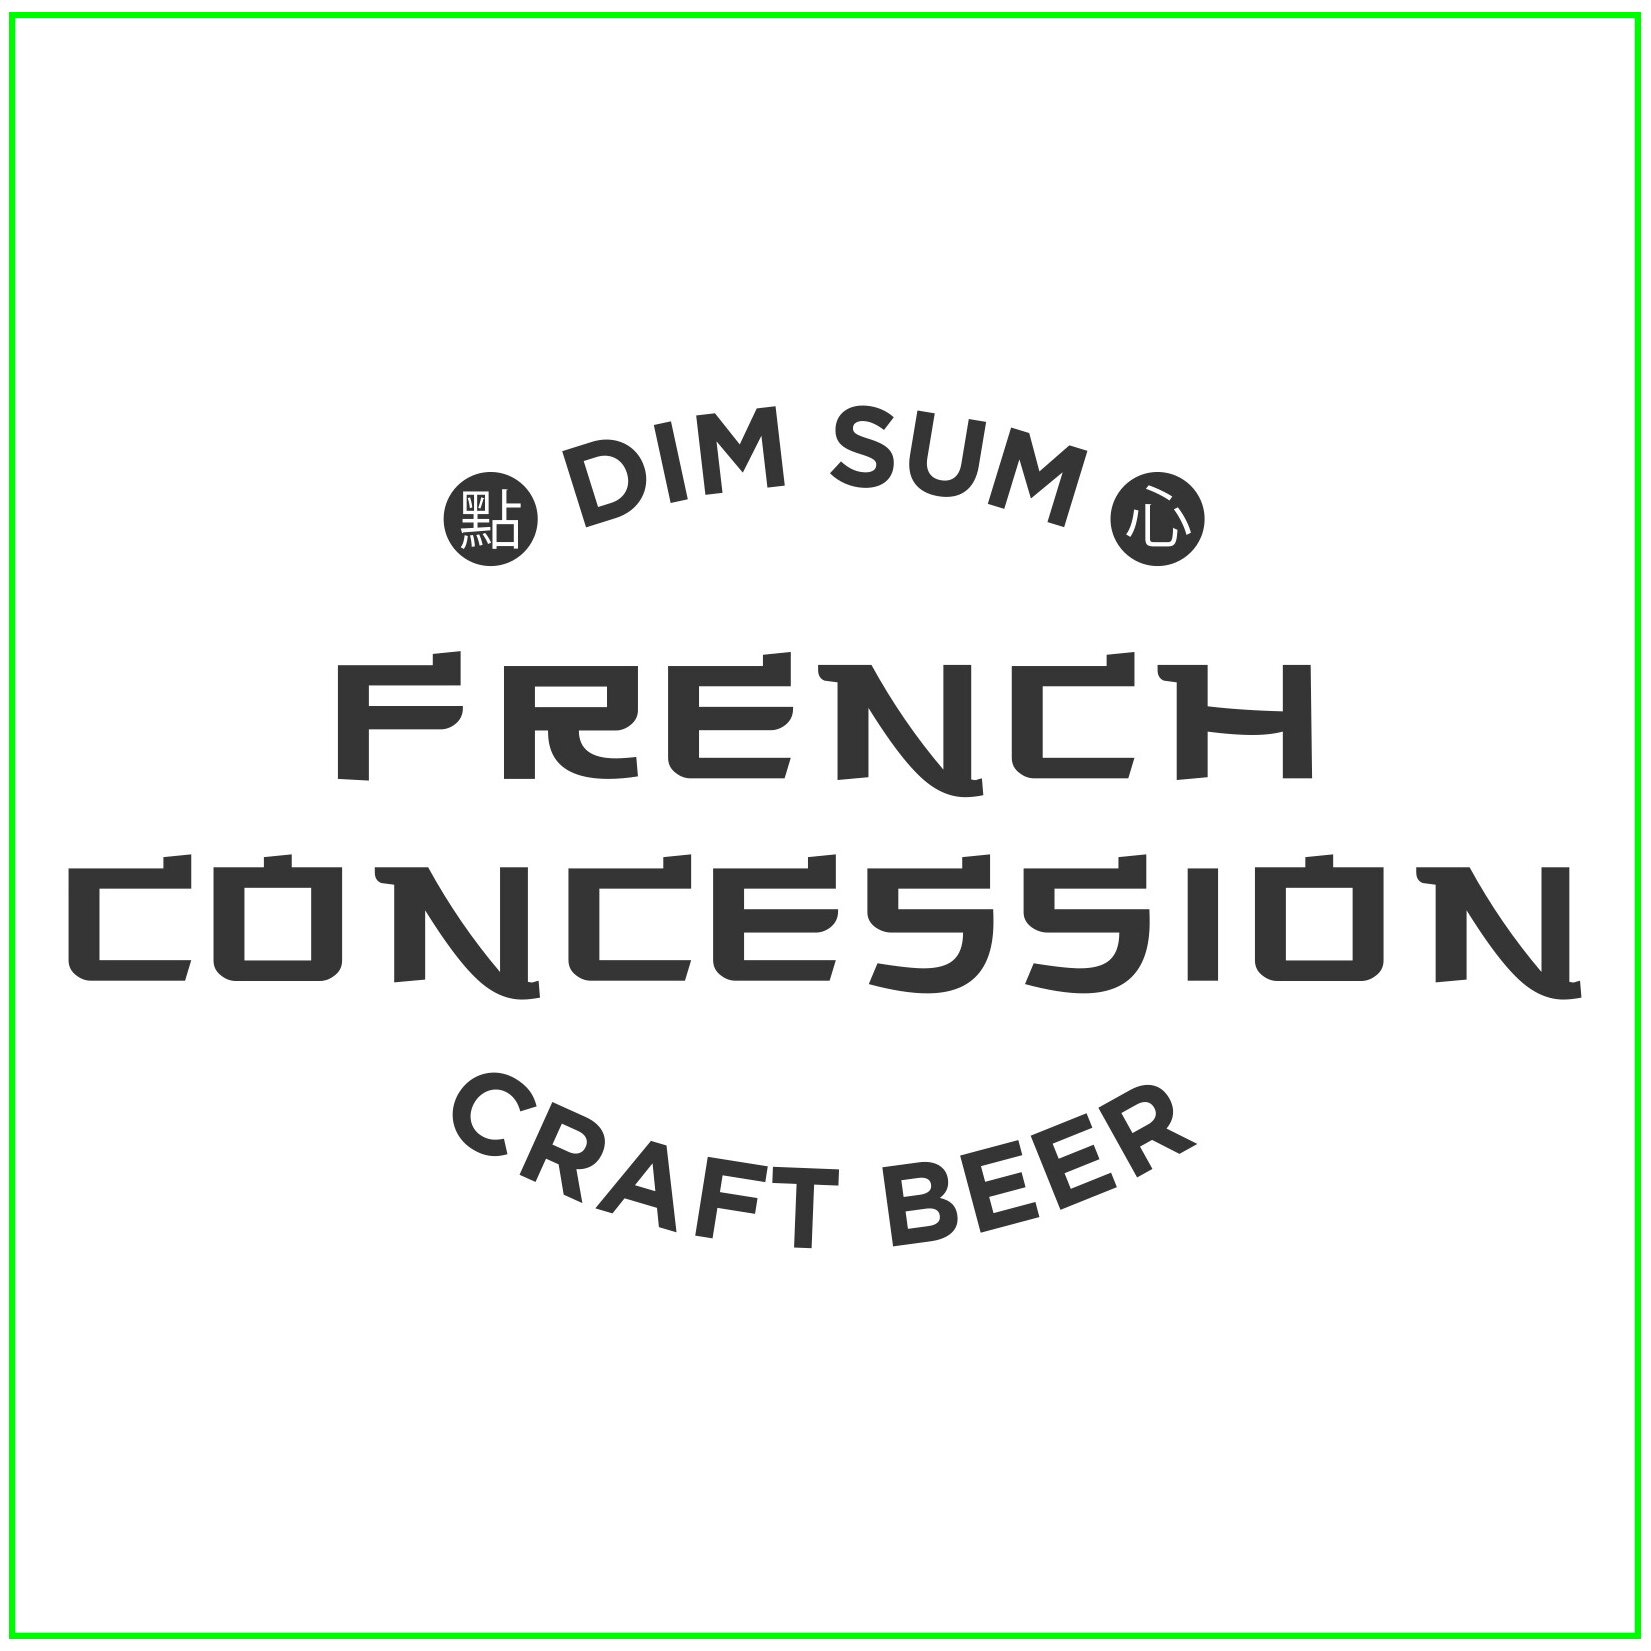 Bringing Shanghai's French Concession to the streets of Hillcrest: We offer Dim Sum, Chinese cuisine and craft beer. Open daily from 12 PM to 10 PM!